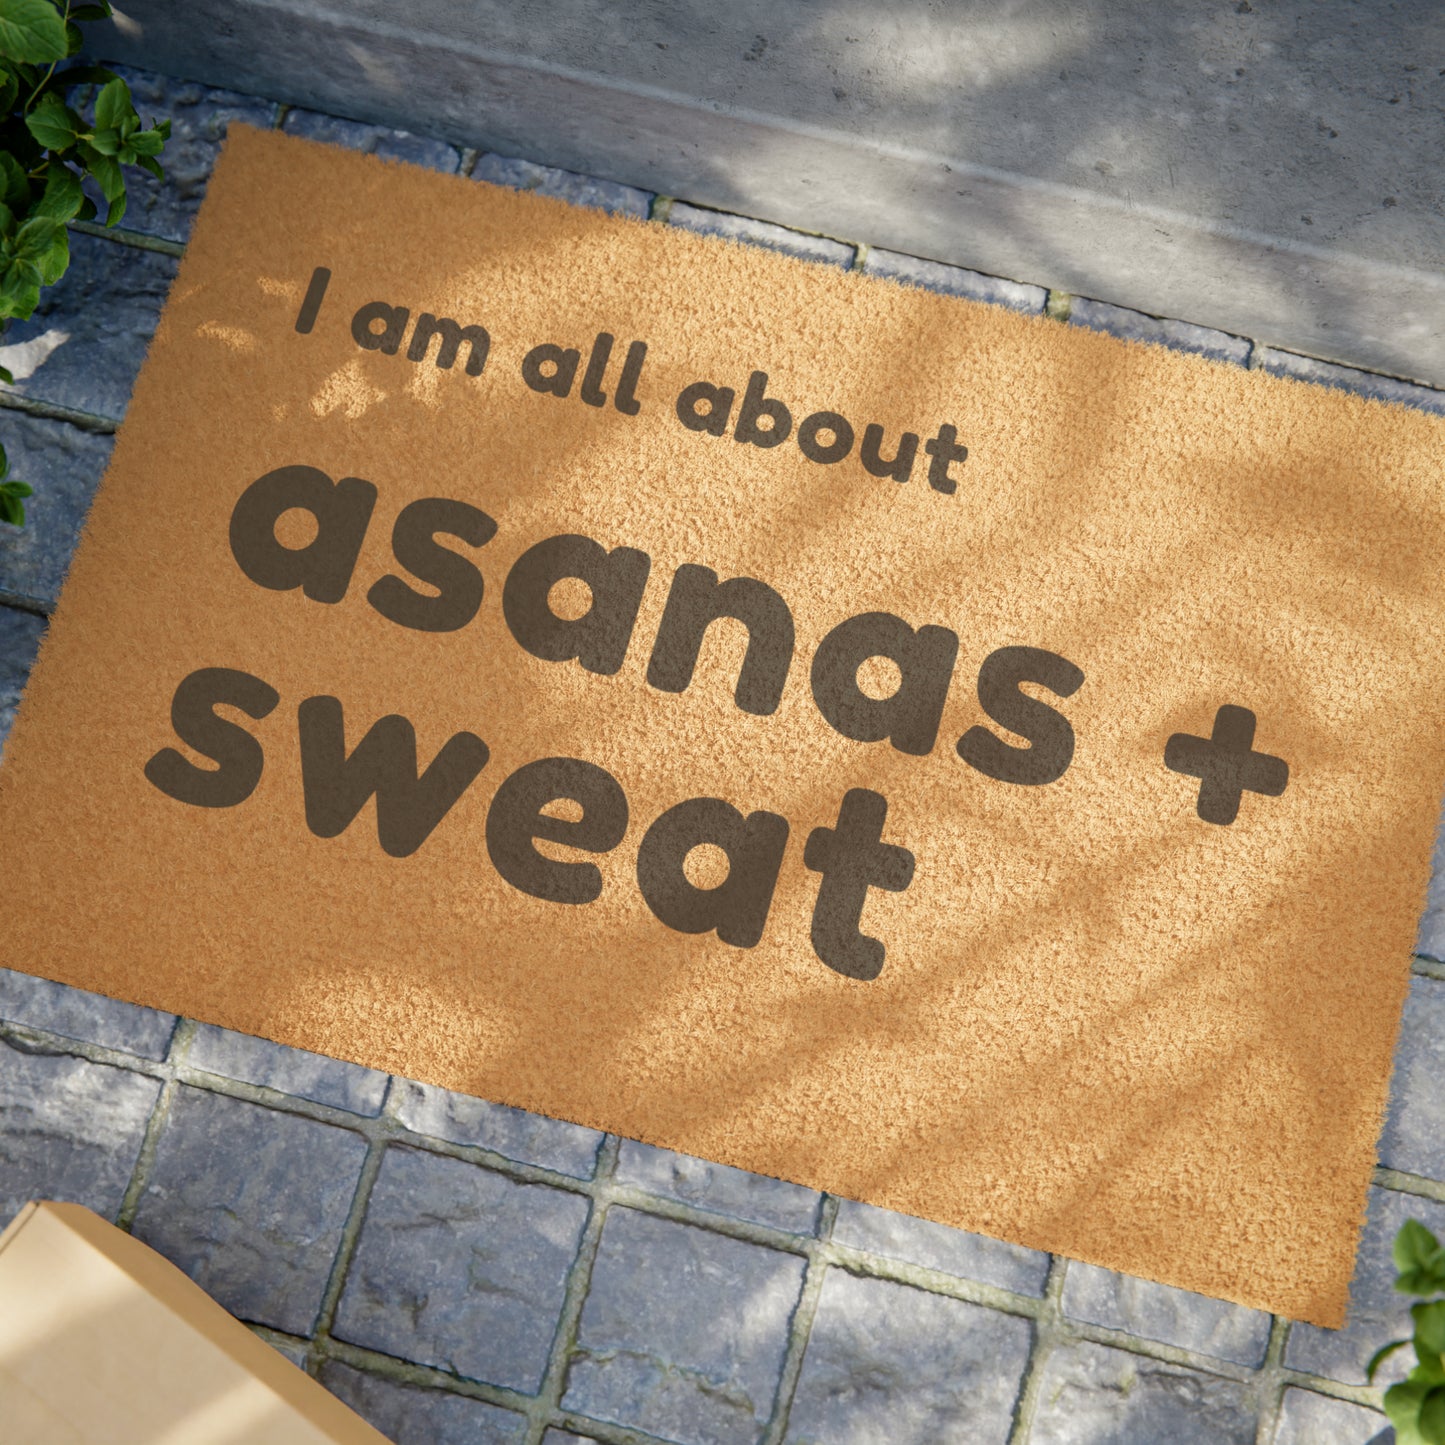 I am all about asanas and sweat - Yoga Doormat